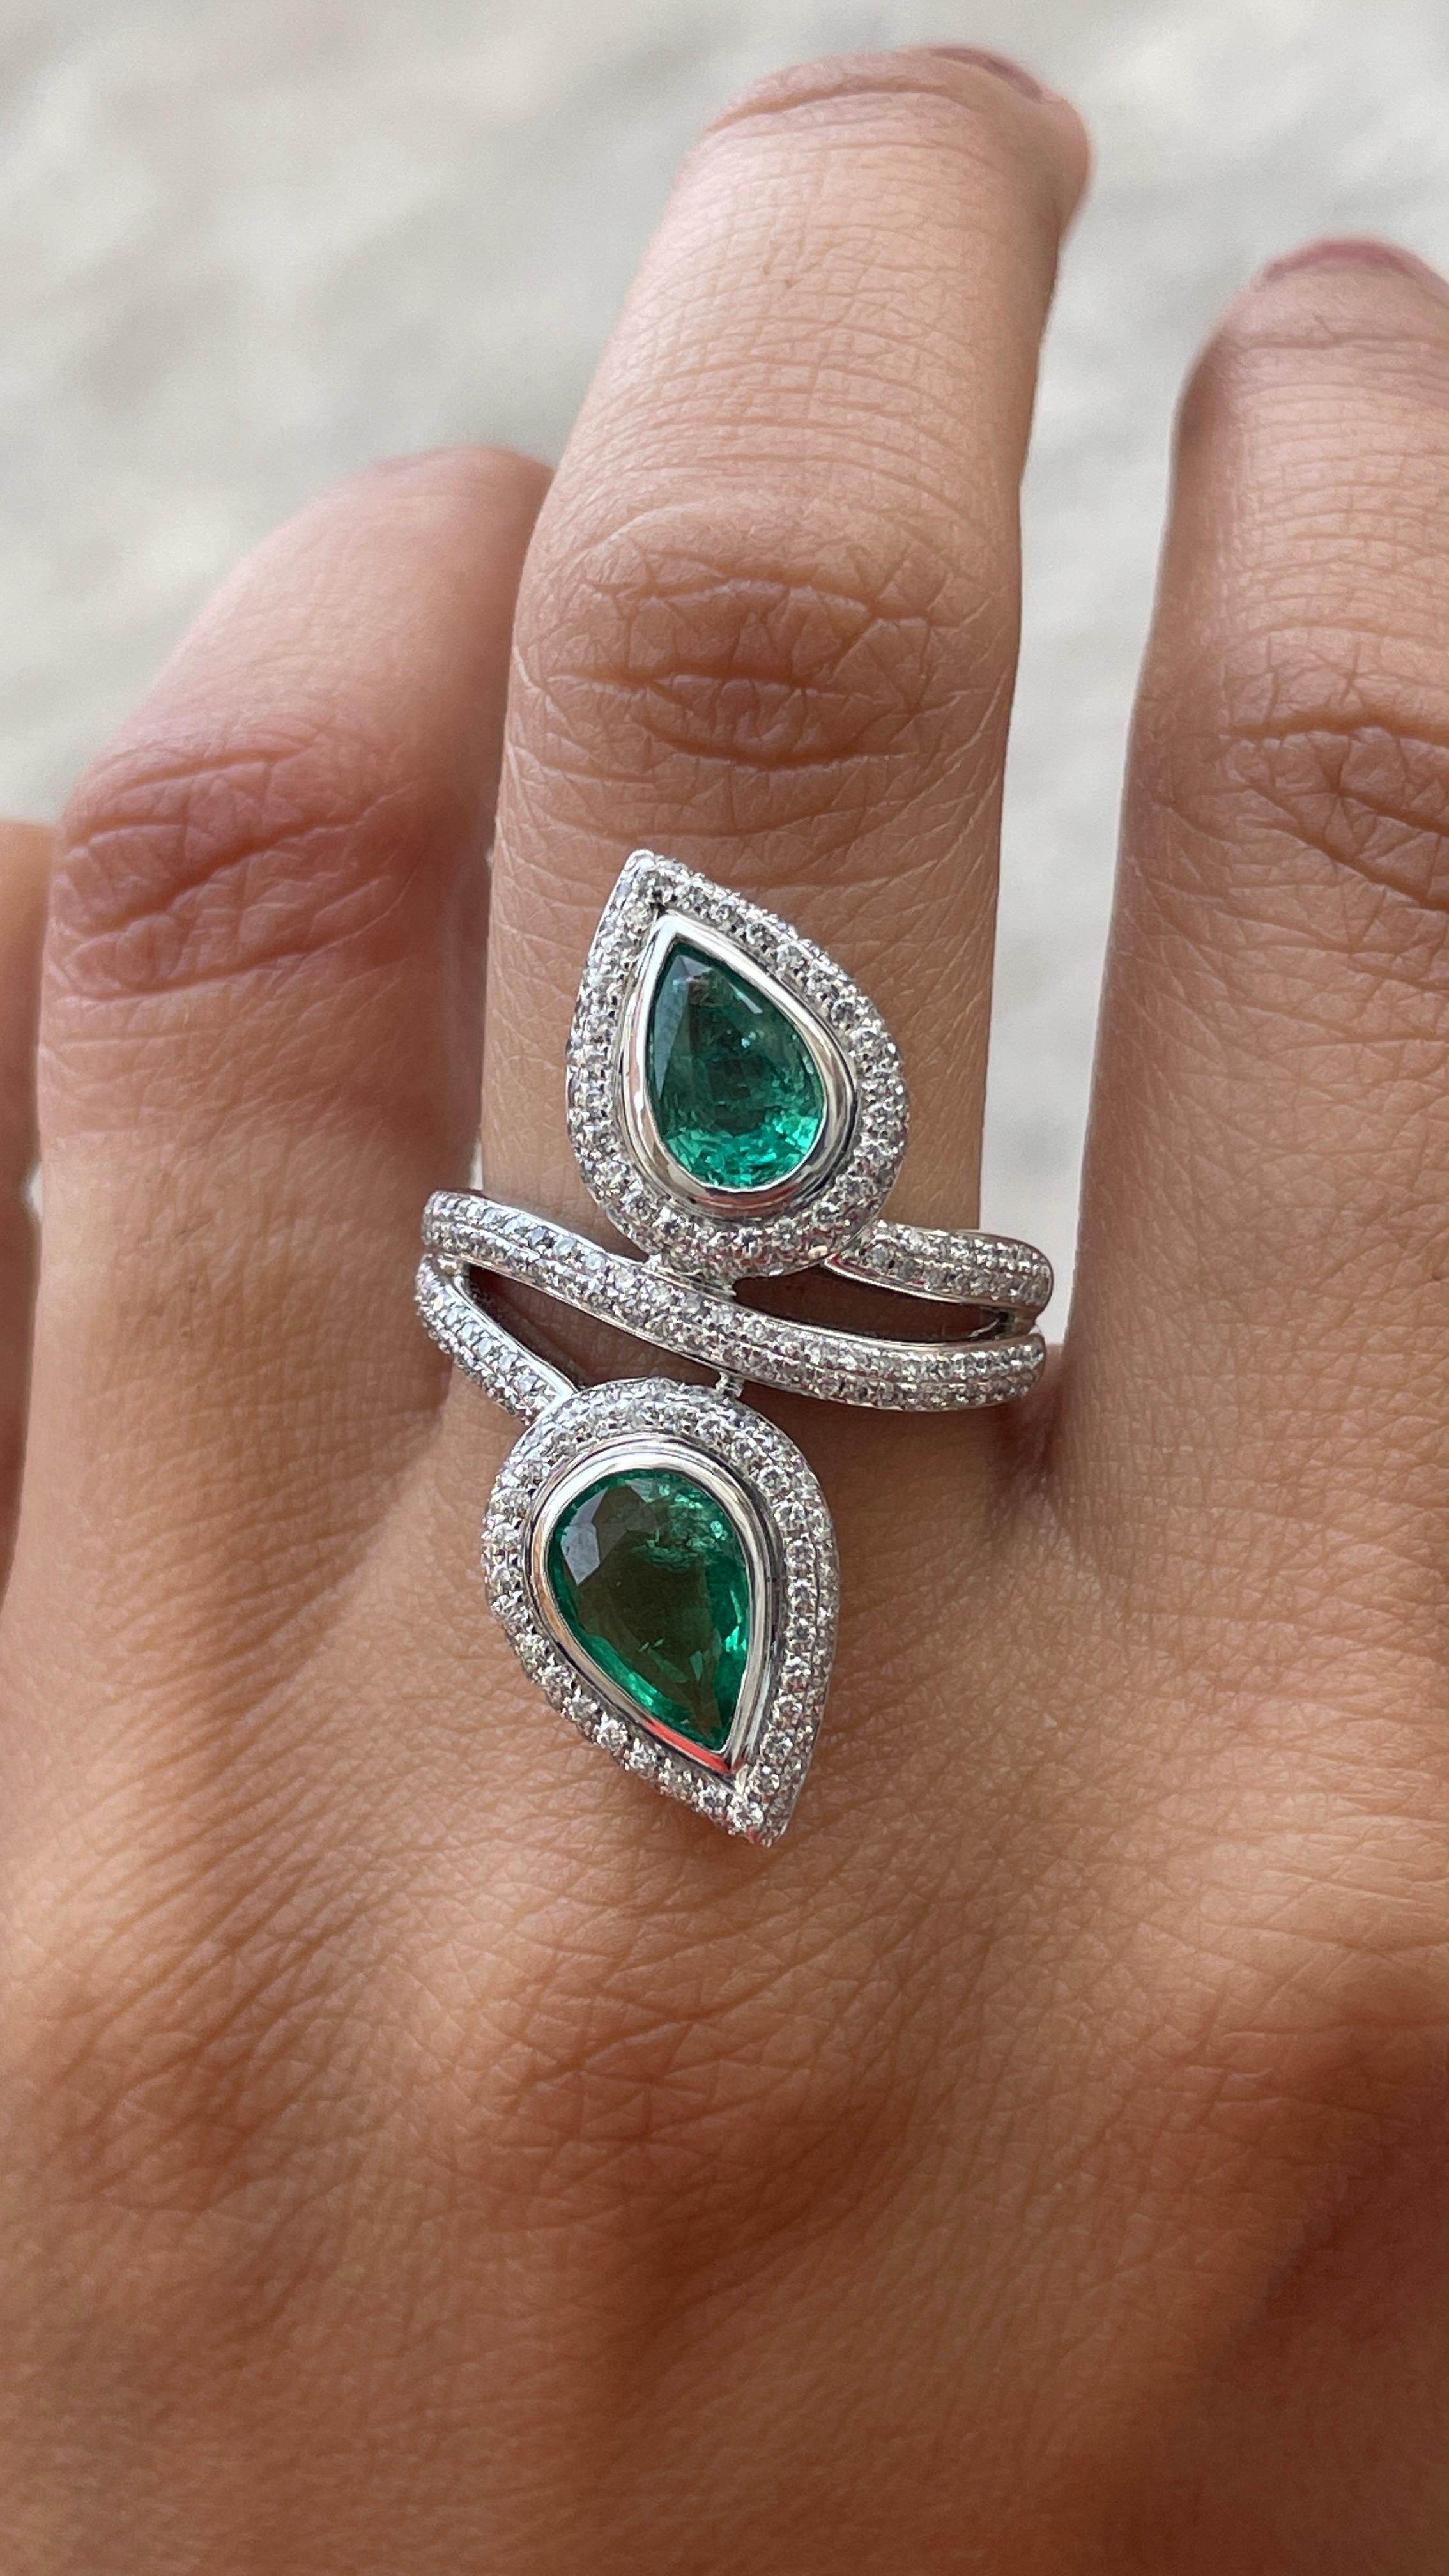 For Sale:  Pear Cut Emerald Cocktail Ring with Diamonds in 14K Solid White Gold 8